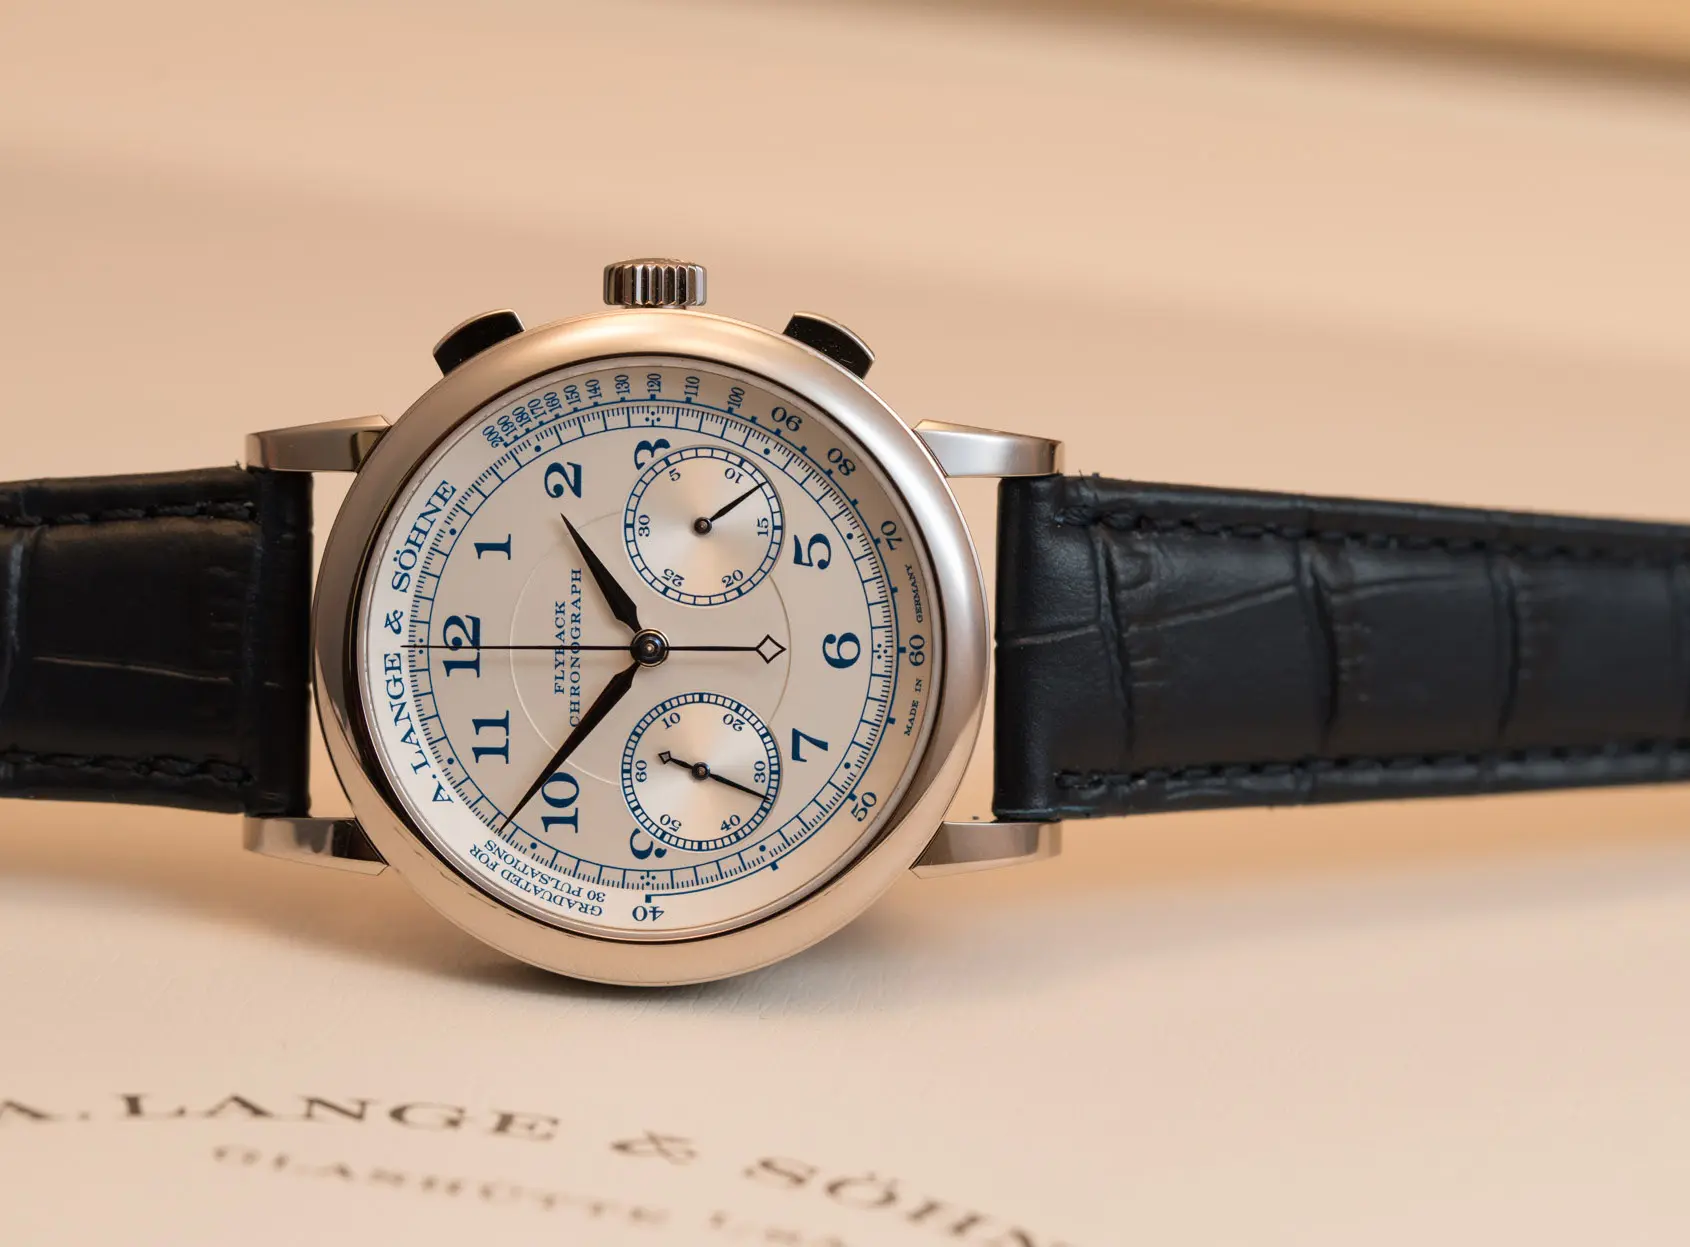 A. Lange & Söhne 1815 Chronograph with Pulsometer Scale – Hands-on Review